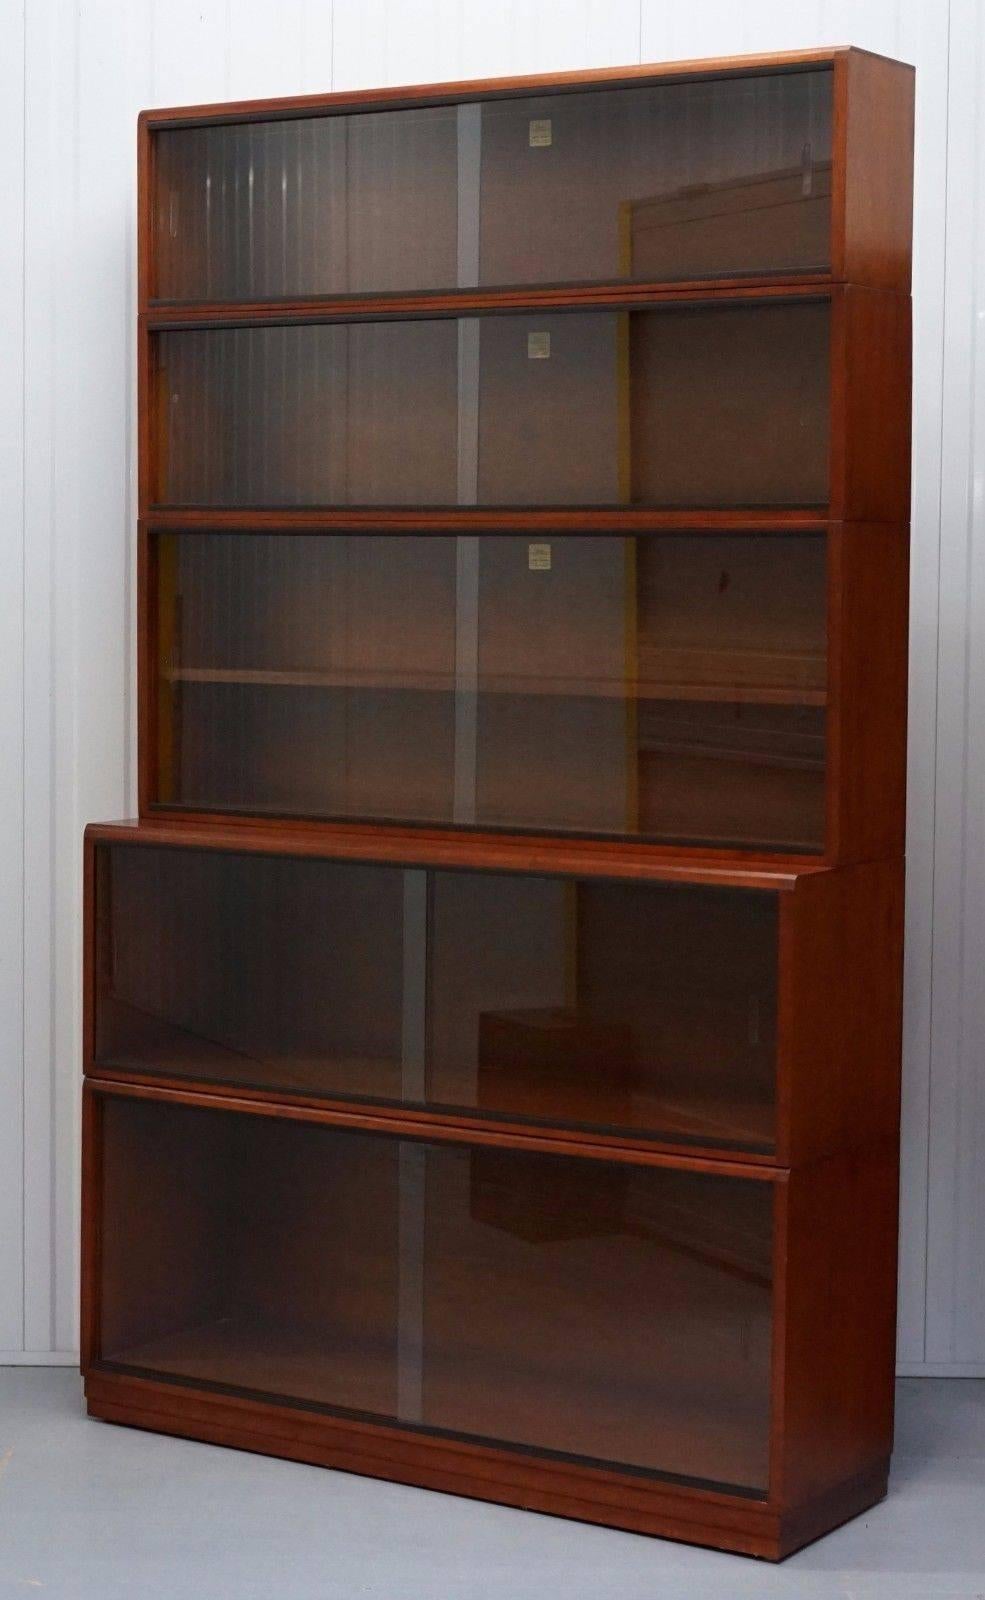 We are delighted to offer for auction this stunning five-piece stacking 1960s section bookcase fully stamped and labeled by Simplex in medium Mahogany and finished with glass sliding doors

A great find in excellent period condition, the glass is